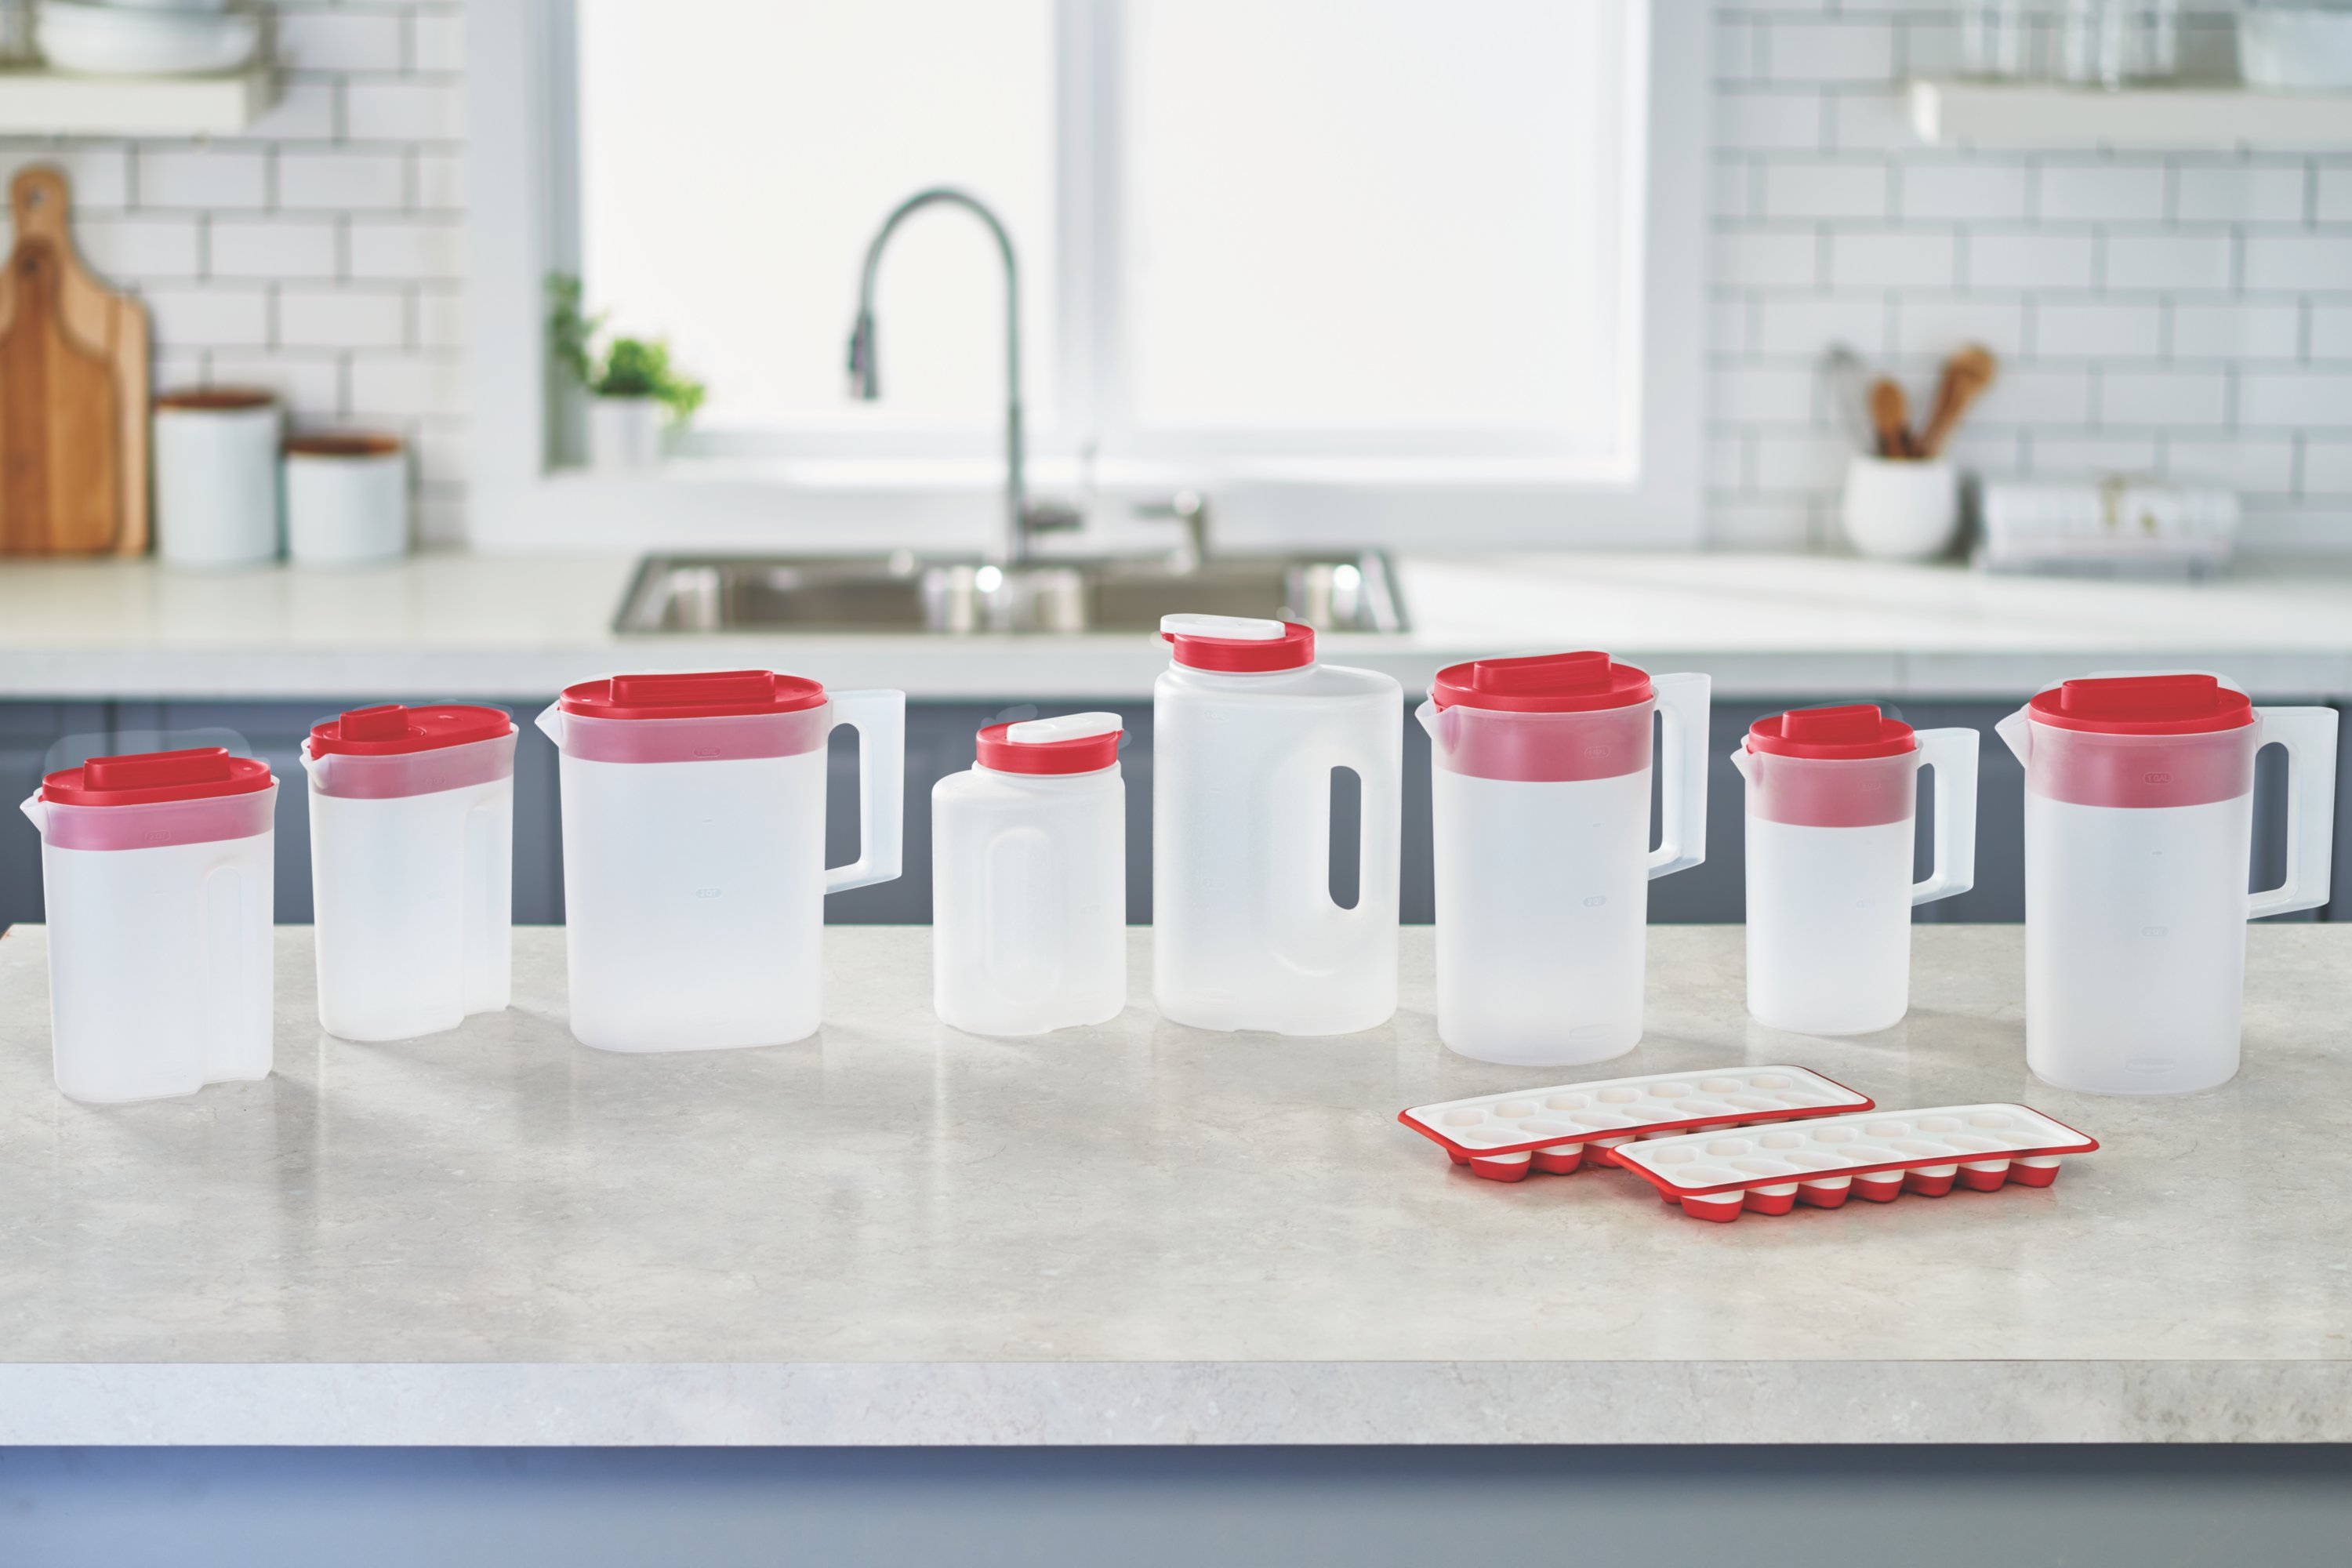 Rubbermaid Simply Pour 1 Gal. Pitcher, Food Storage, Household